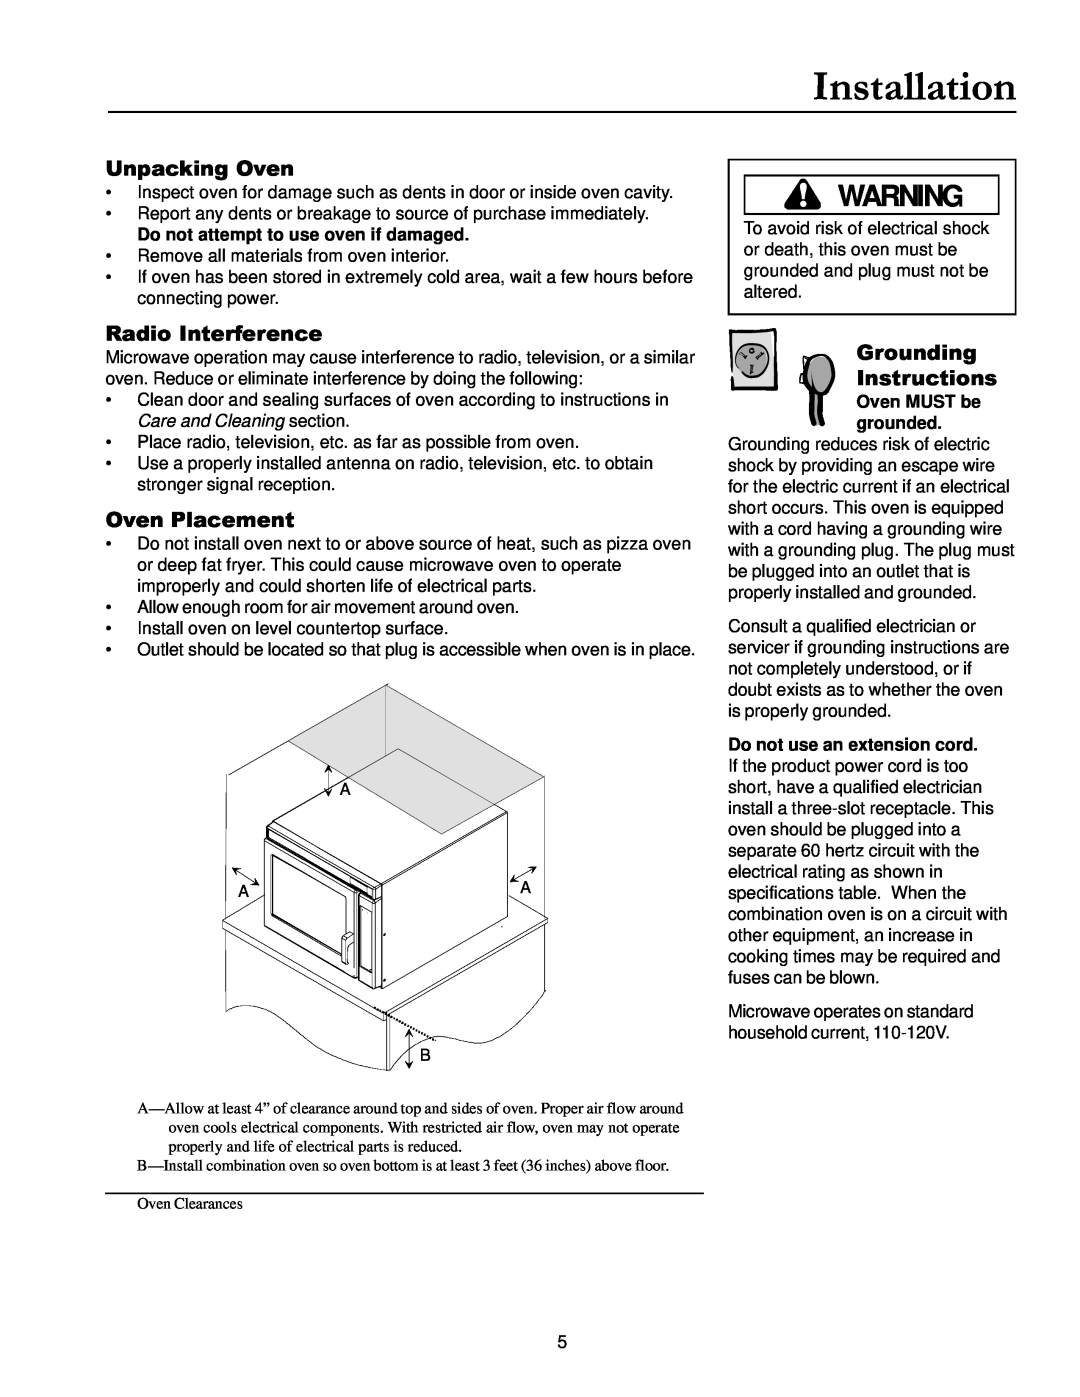 Amana ACM1580A owner manual Installation, Unpacking Oven, Radio Interference, Oven Placement, Grounding Instructions 